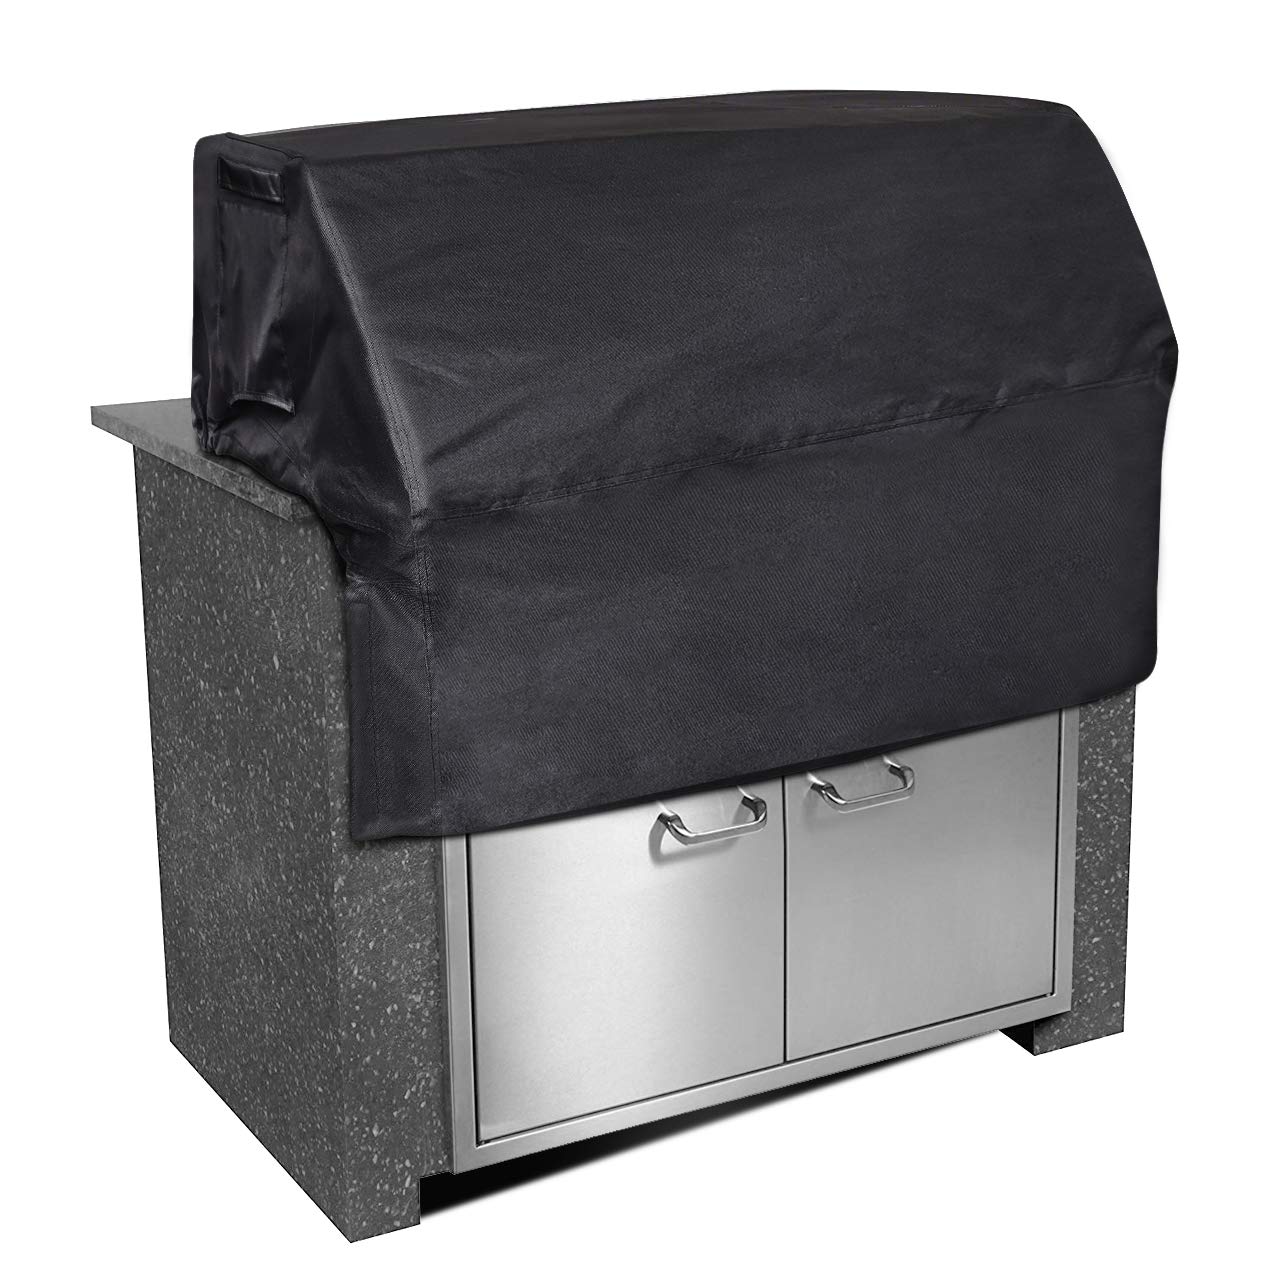 i COVER icOVER 37 inch Built in grill cover Waterproof Heavyduty UV Resistant Built in Barbecue grill cover -37(W) A 27(D) A 24(H)